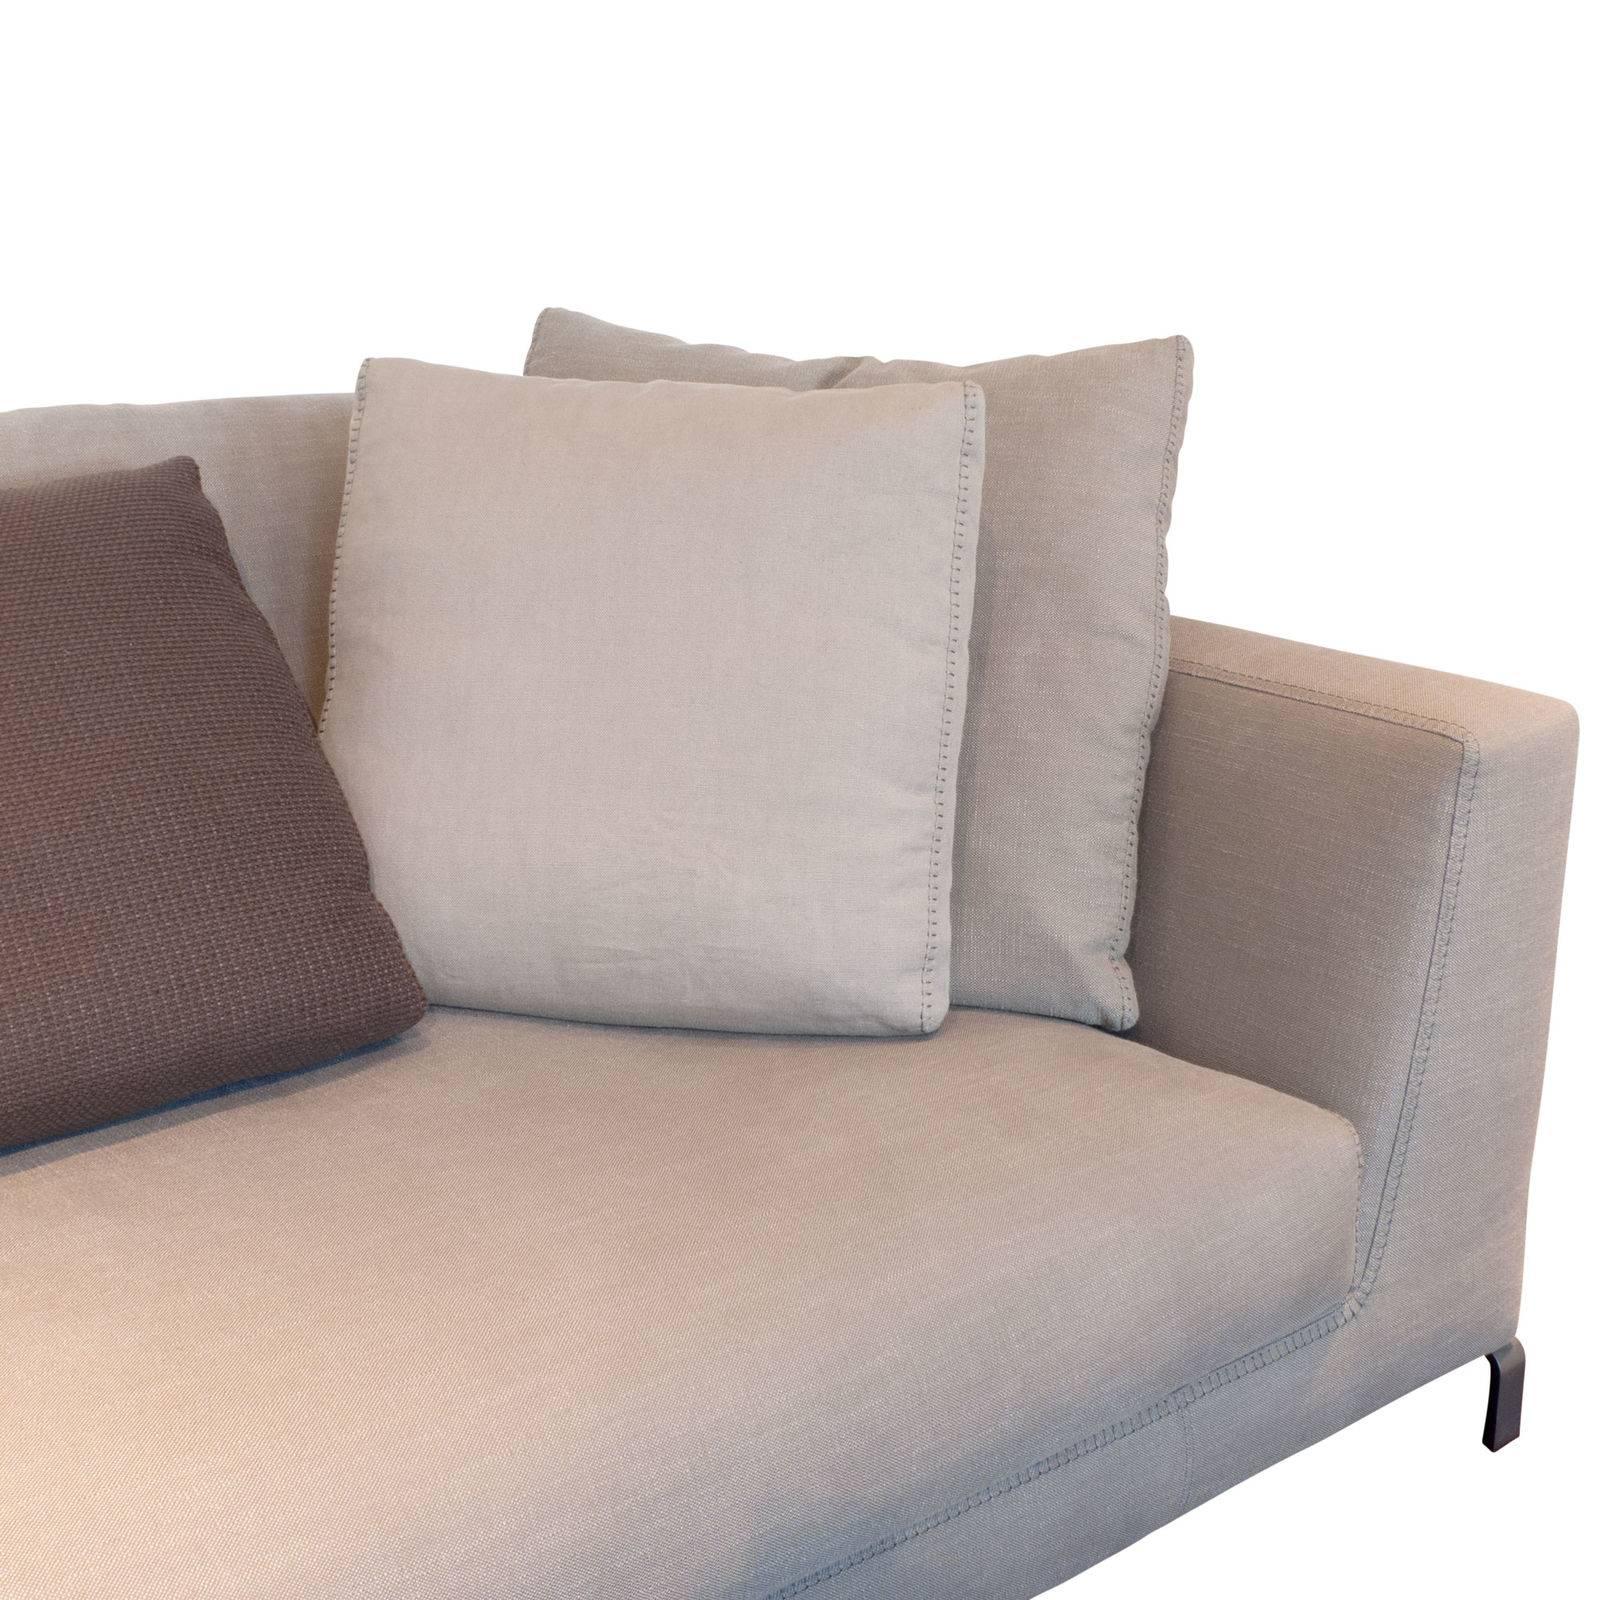 Design sofa by the well-known Italian manufacture B&B Italia which is famous for extraordinary furniture pieces. This sofa is made from finest fabric and is best placed in sophisticated apartments.